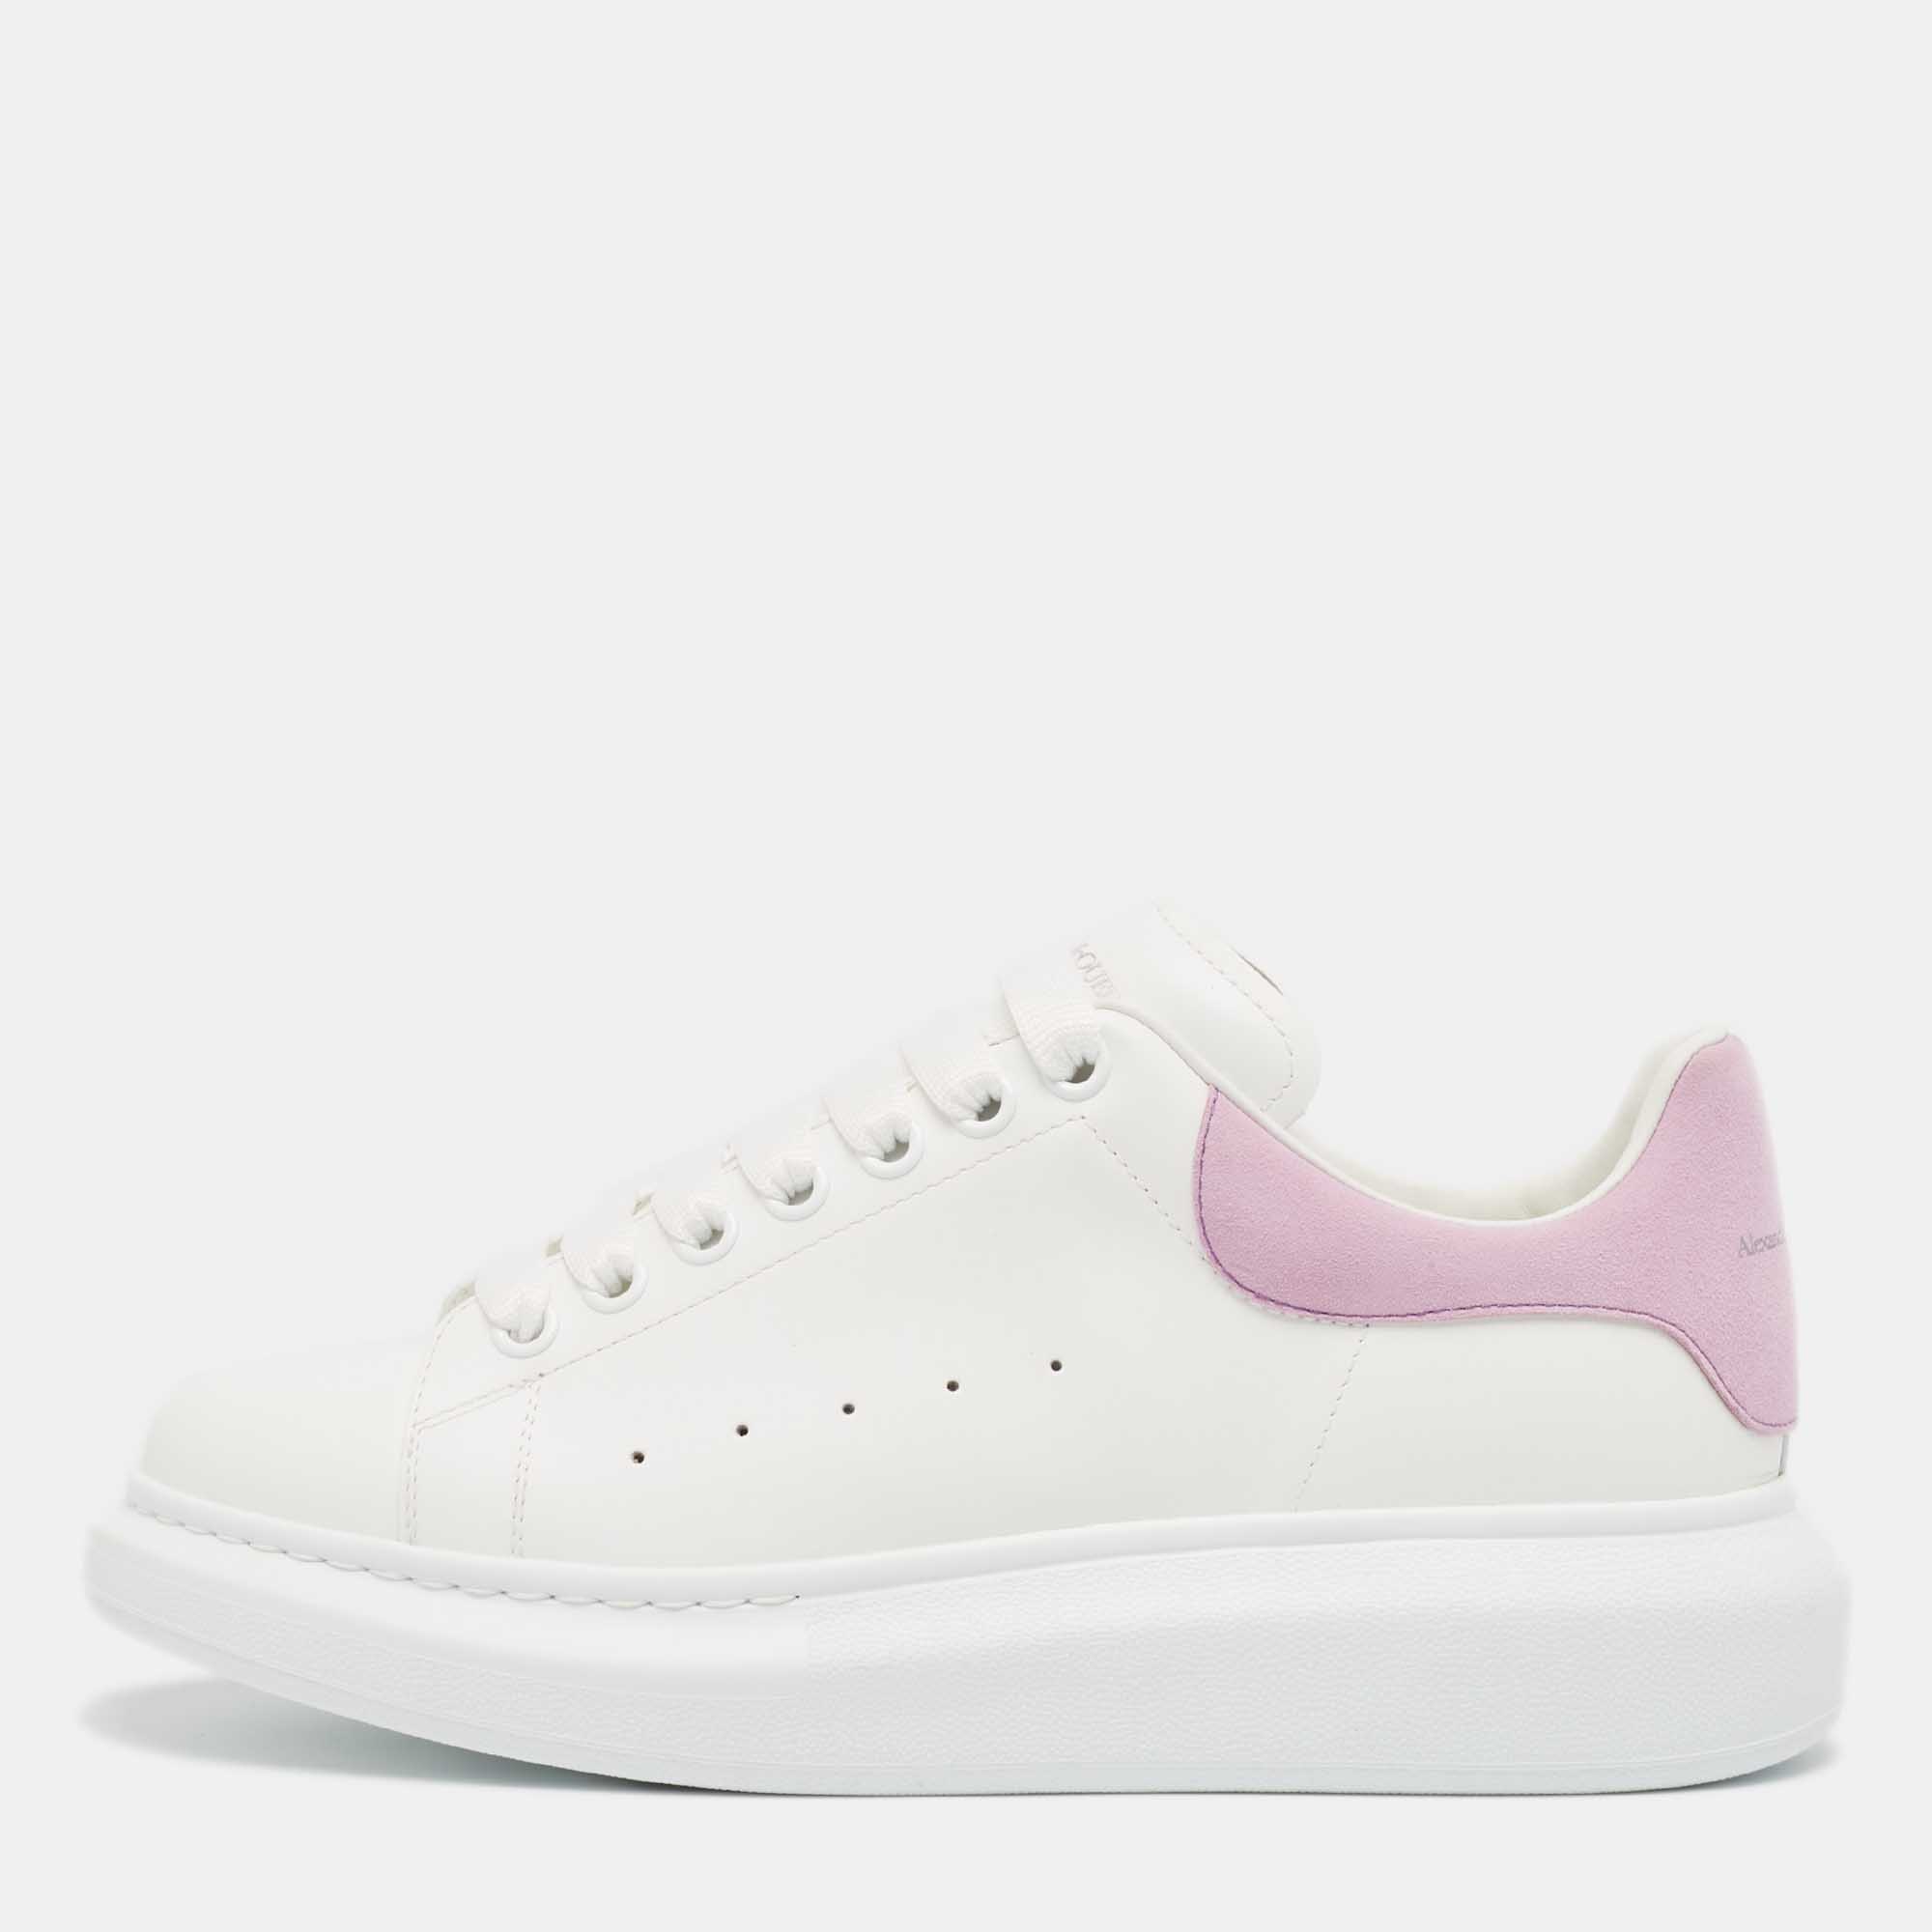 Coming in a classic silhouette these designer sneakers are a seamless combination of luxury comfort and style. These sneakers are designed with signature details and comfortable insoles.